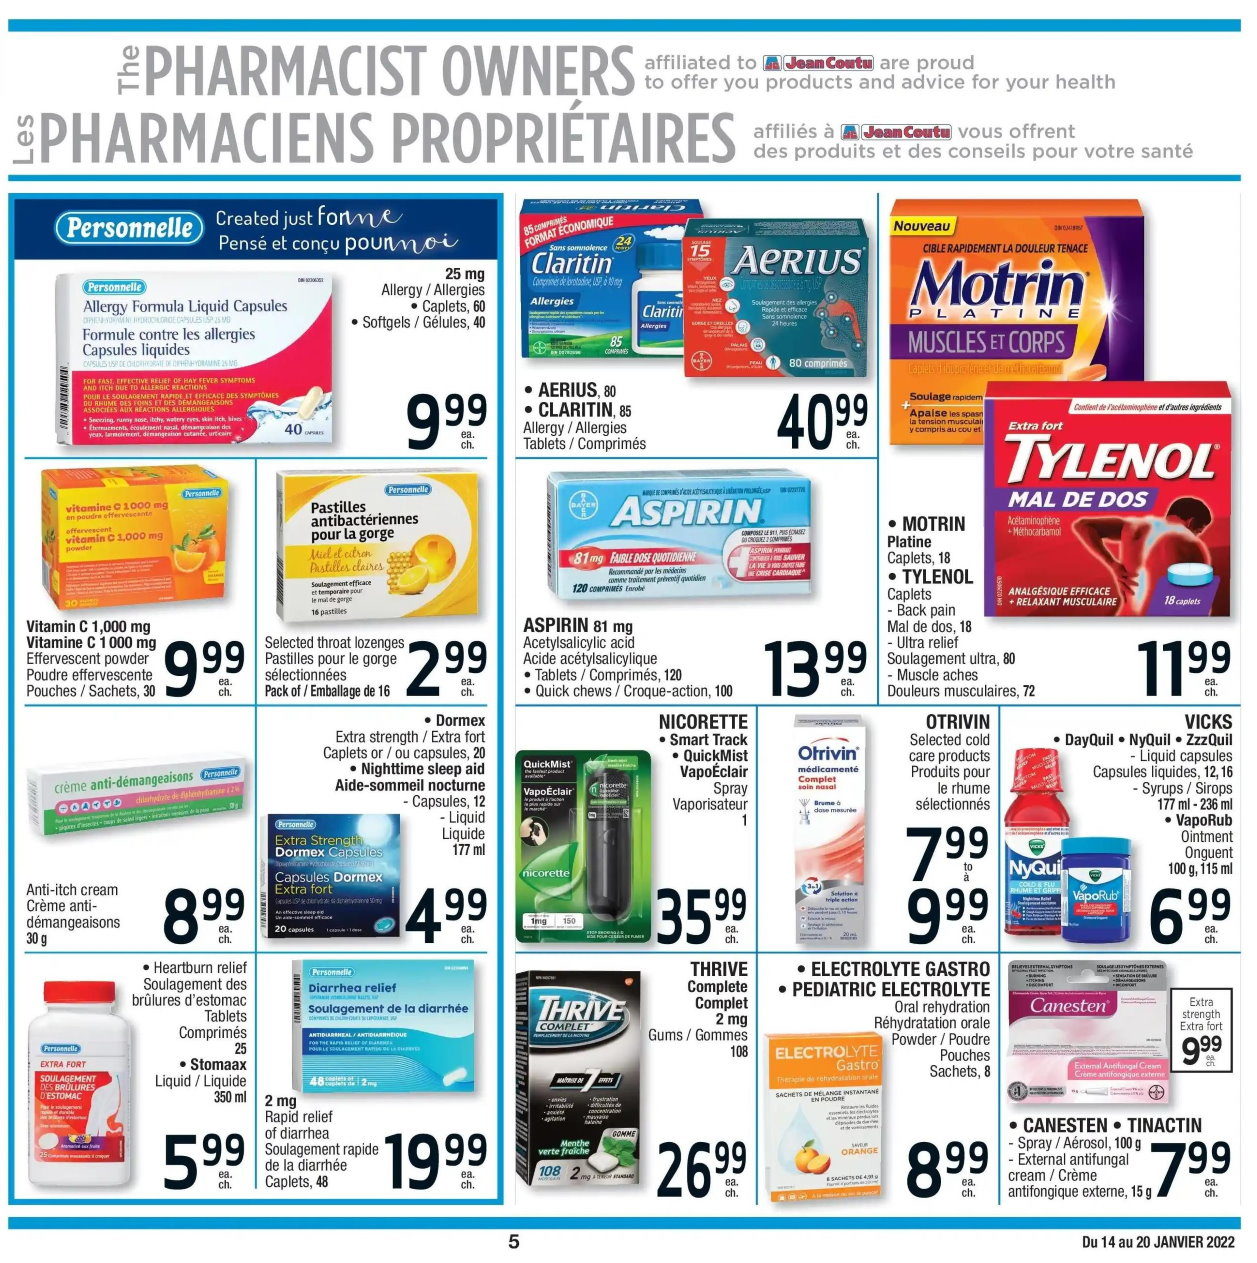 Jean Coutu - Even More Savings - Weekly Flyer Specials - Page 5